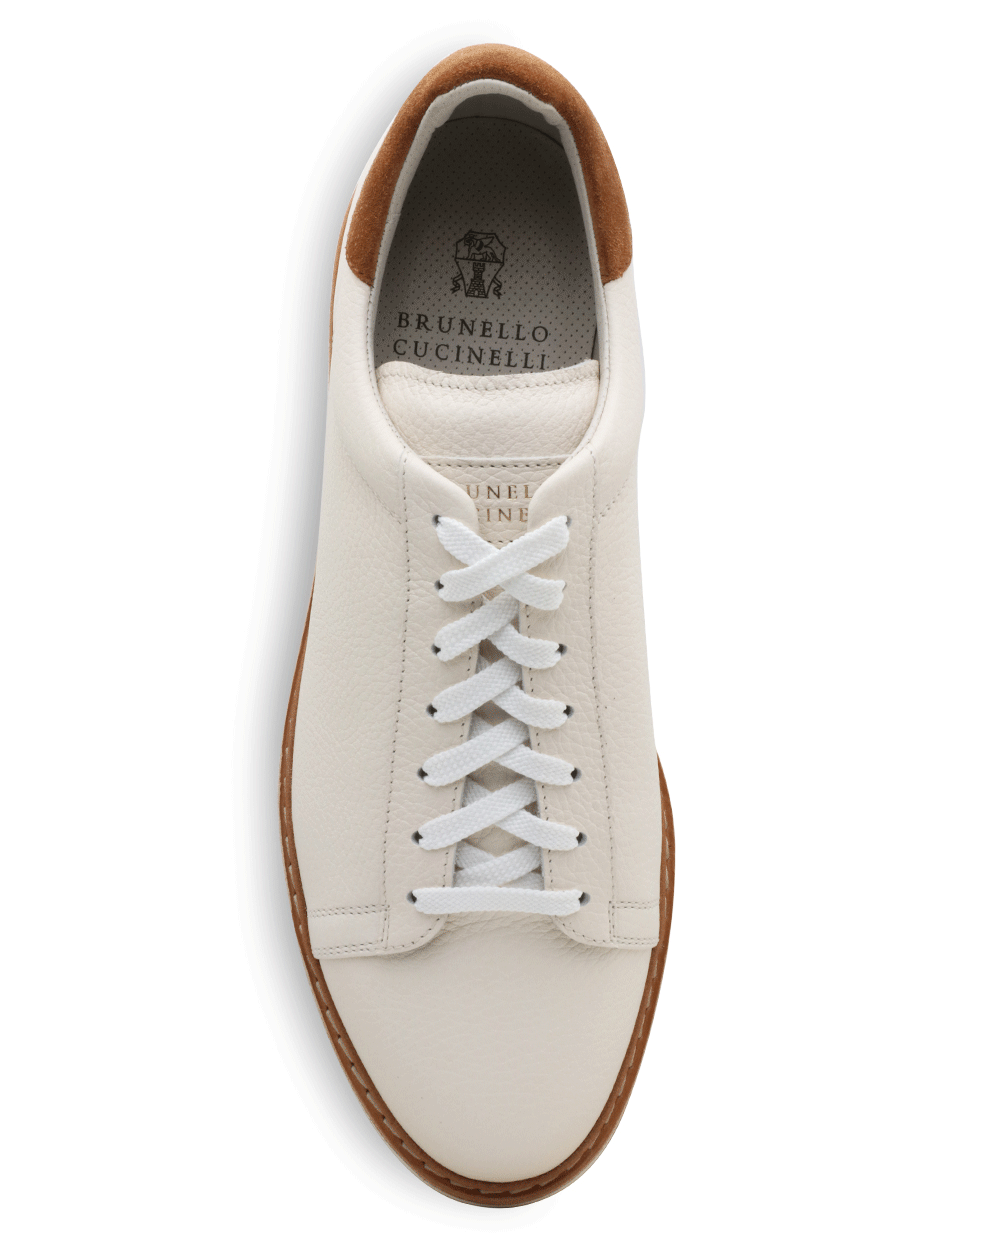 Leather Low Top Sneaker in Panama and Whiskey